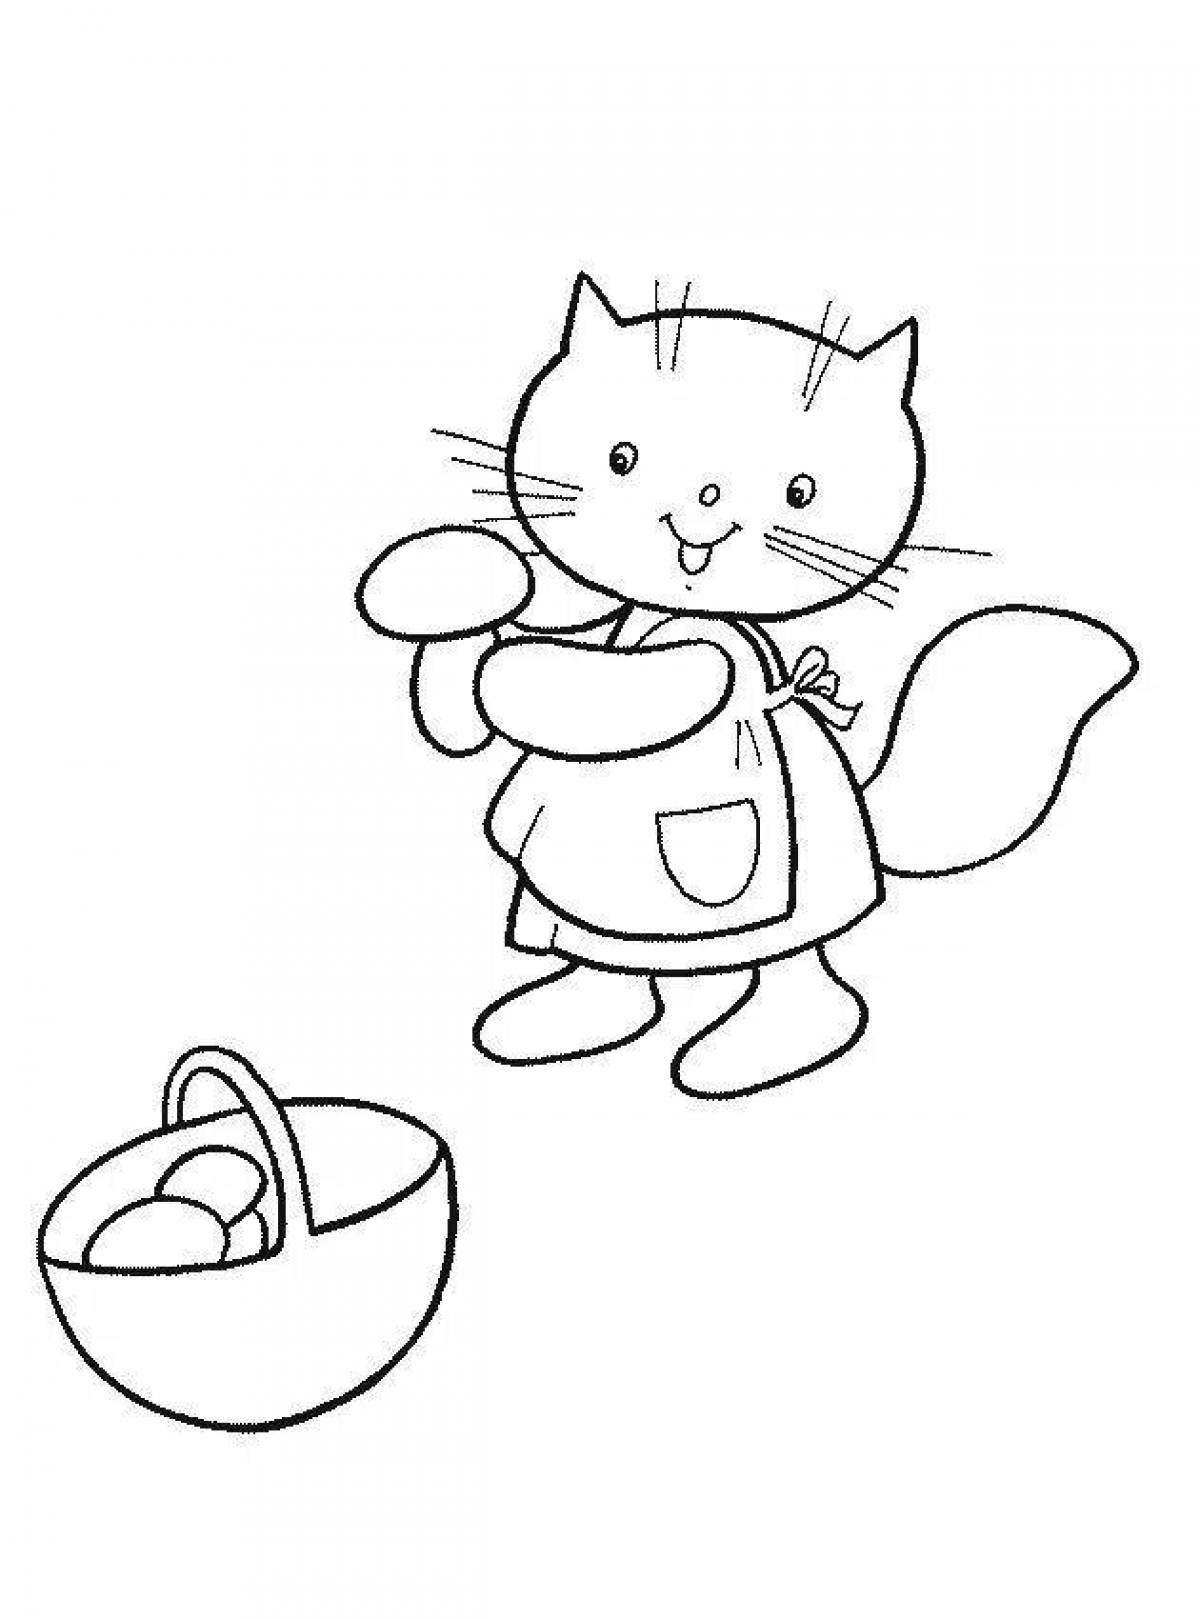 Curious cat coloring page for kids